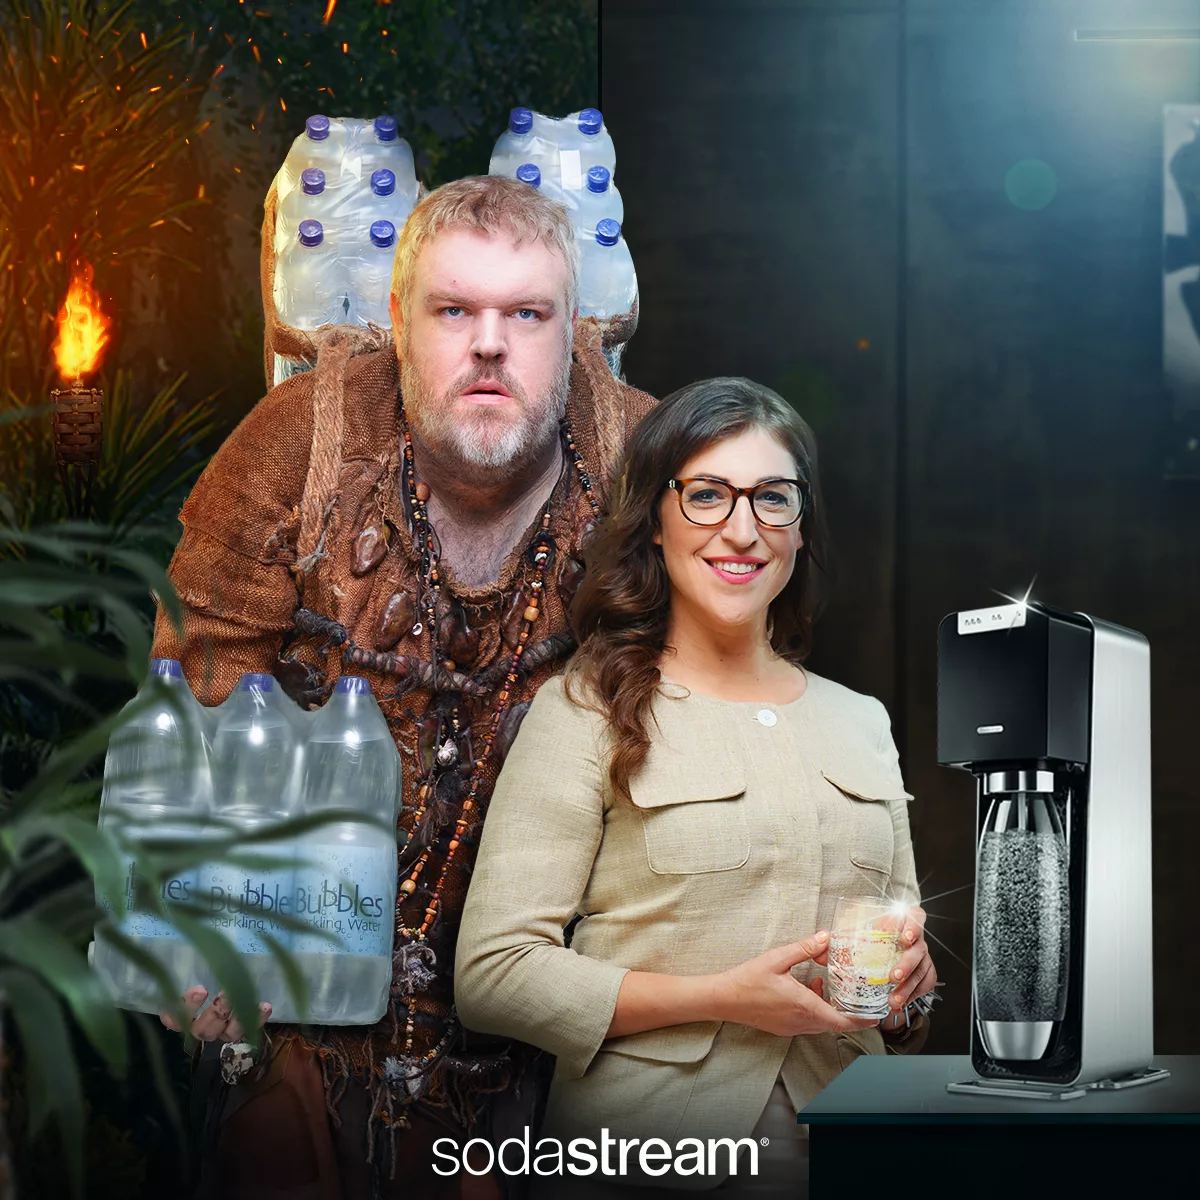 Caveman with plastic bottles and modern woman with SodaStream machine.